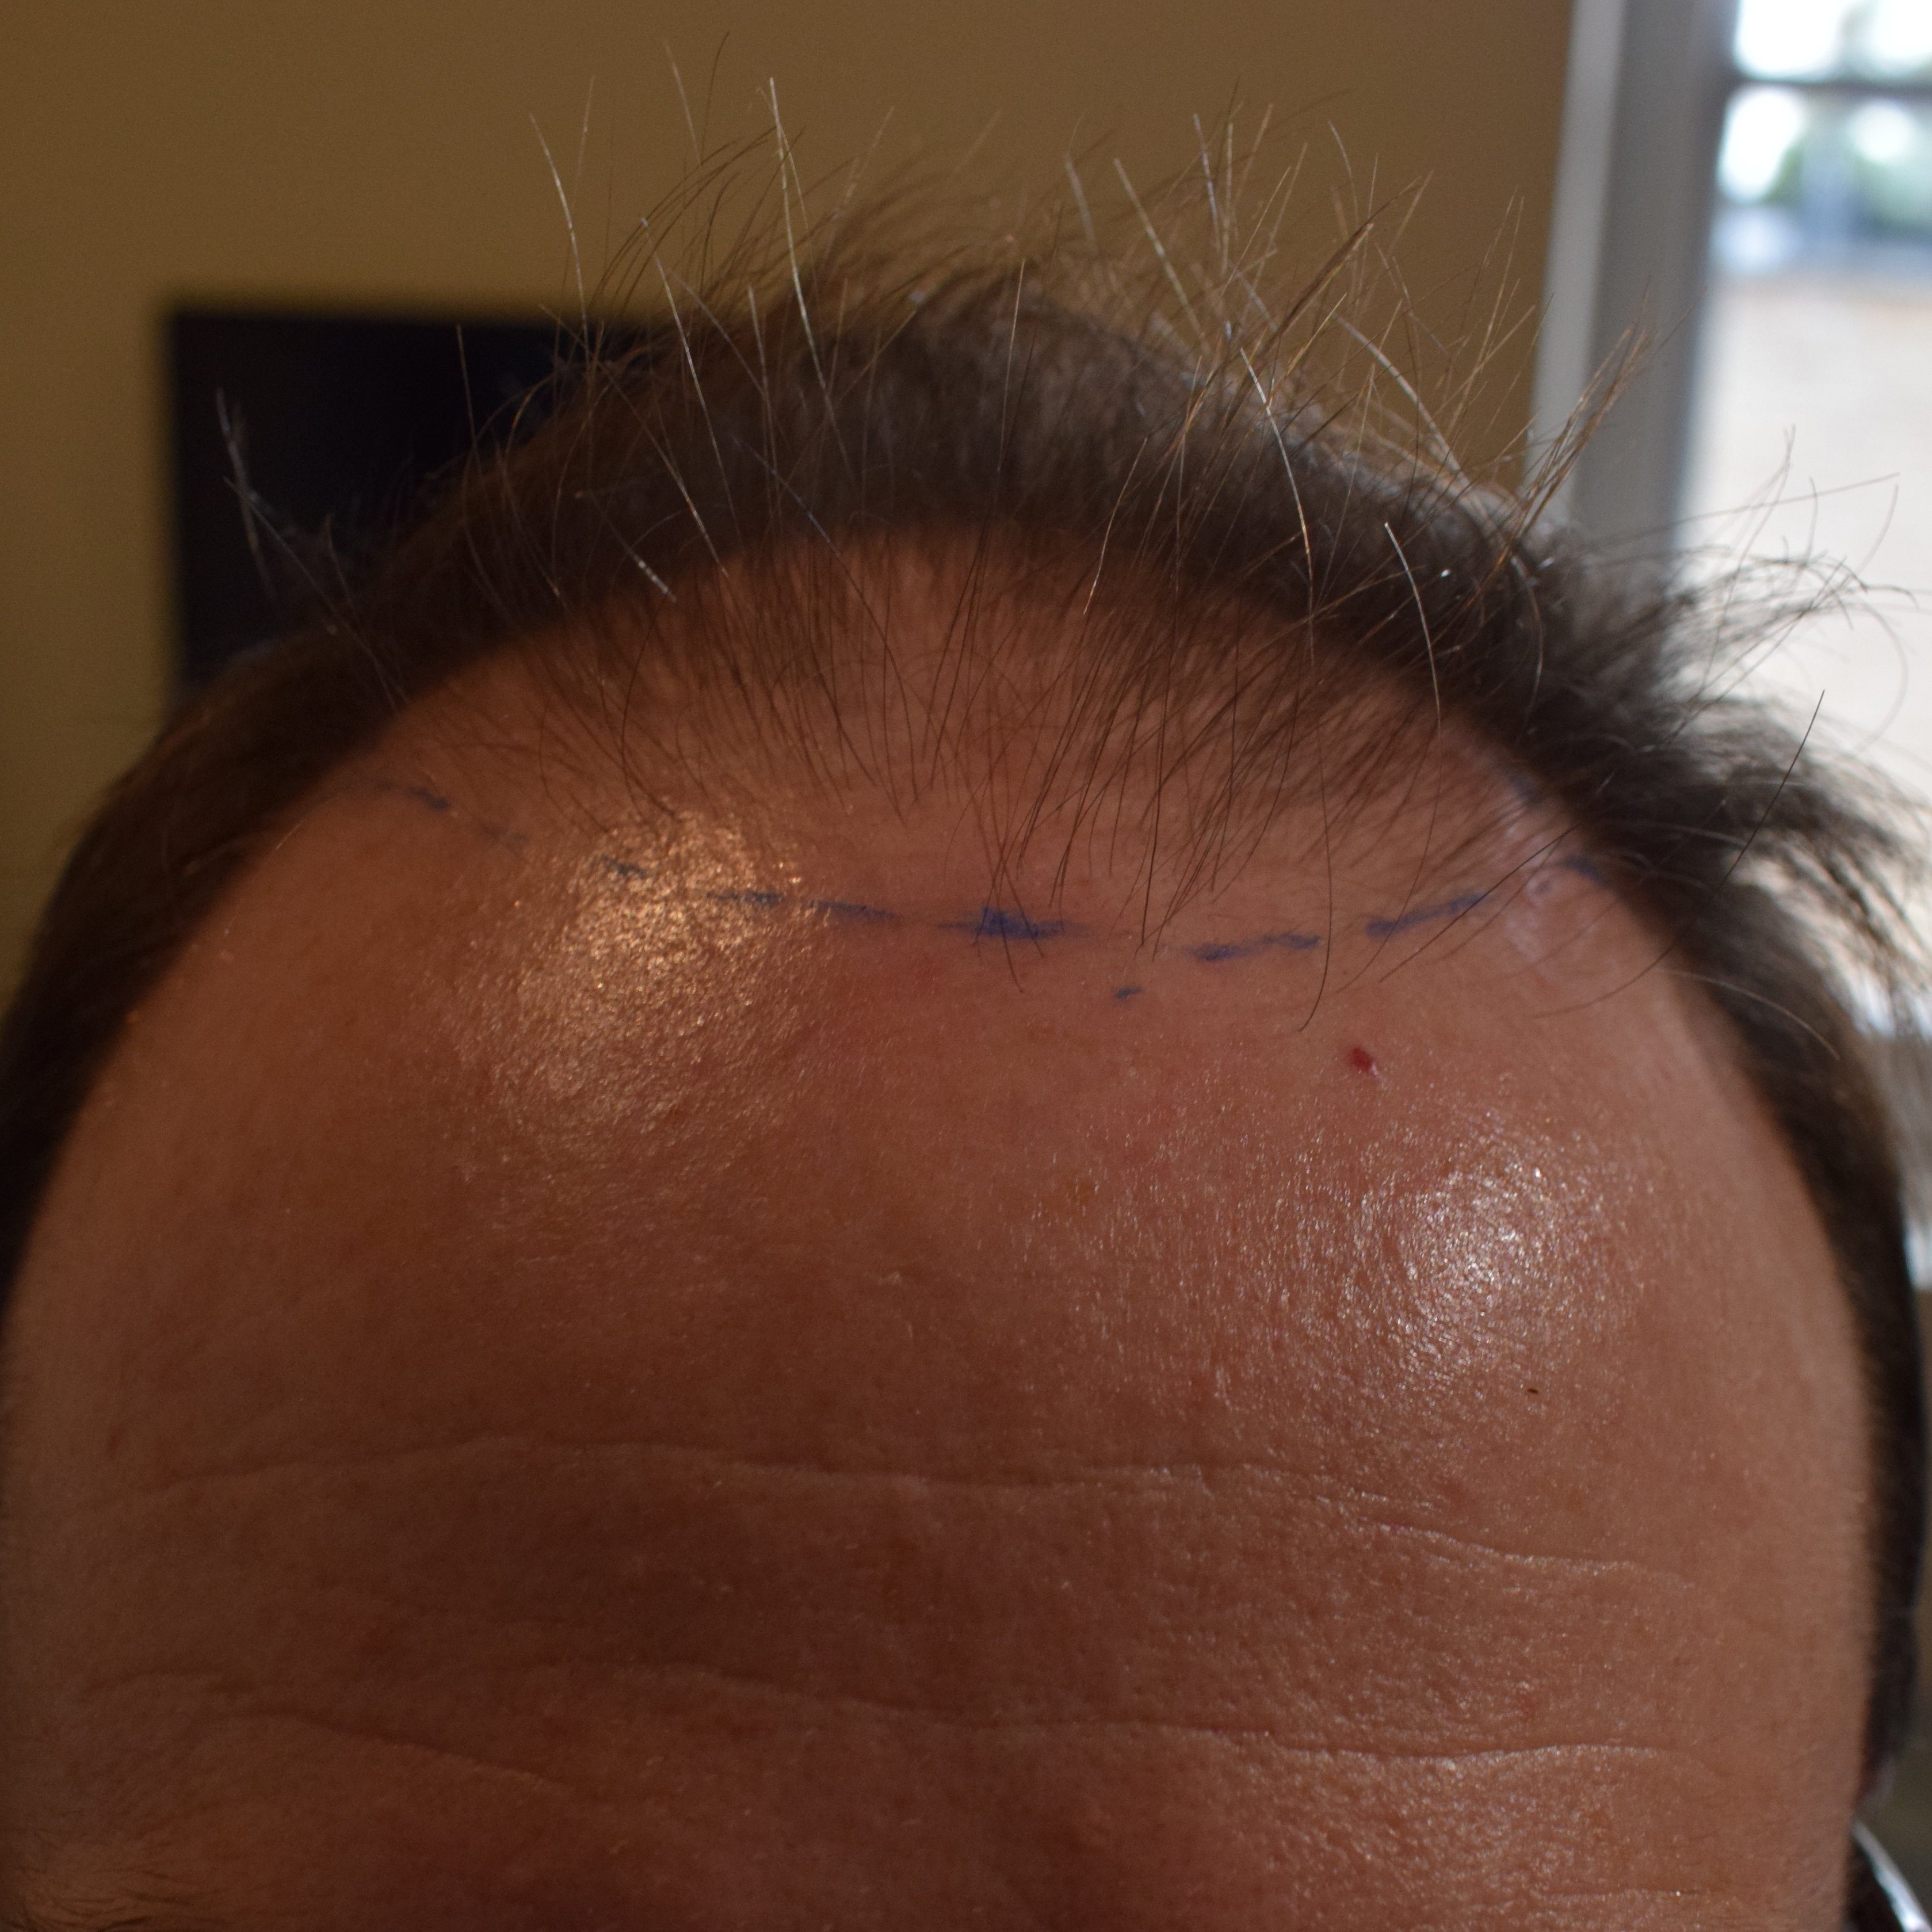 Hair Transplant After 1 Month: Photos, Results, Side Effects, Wimpole Clinic